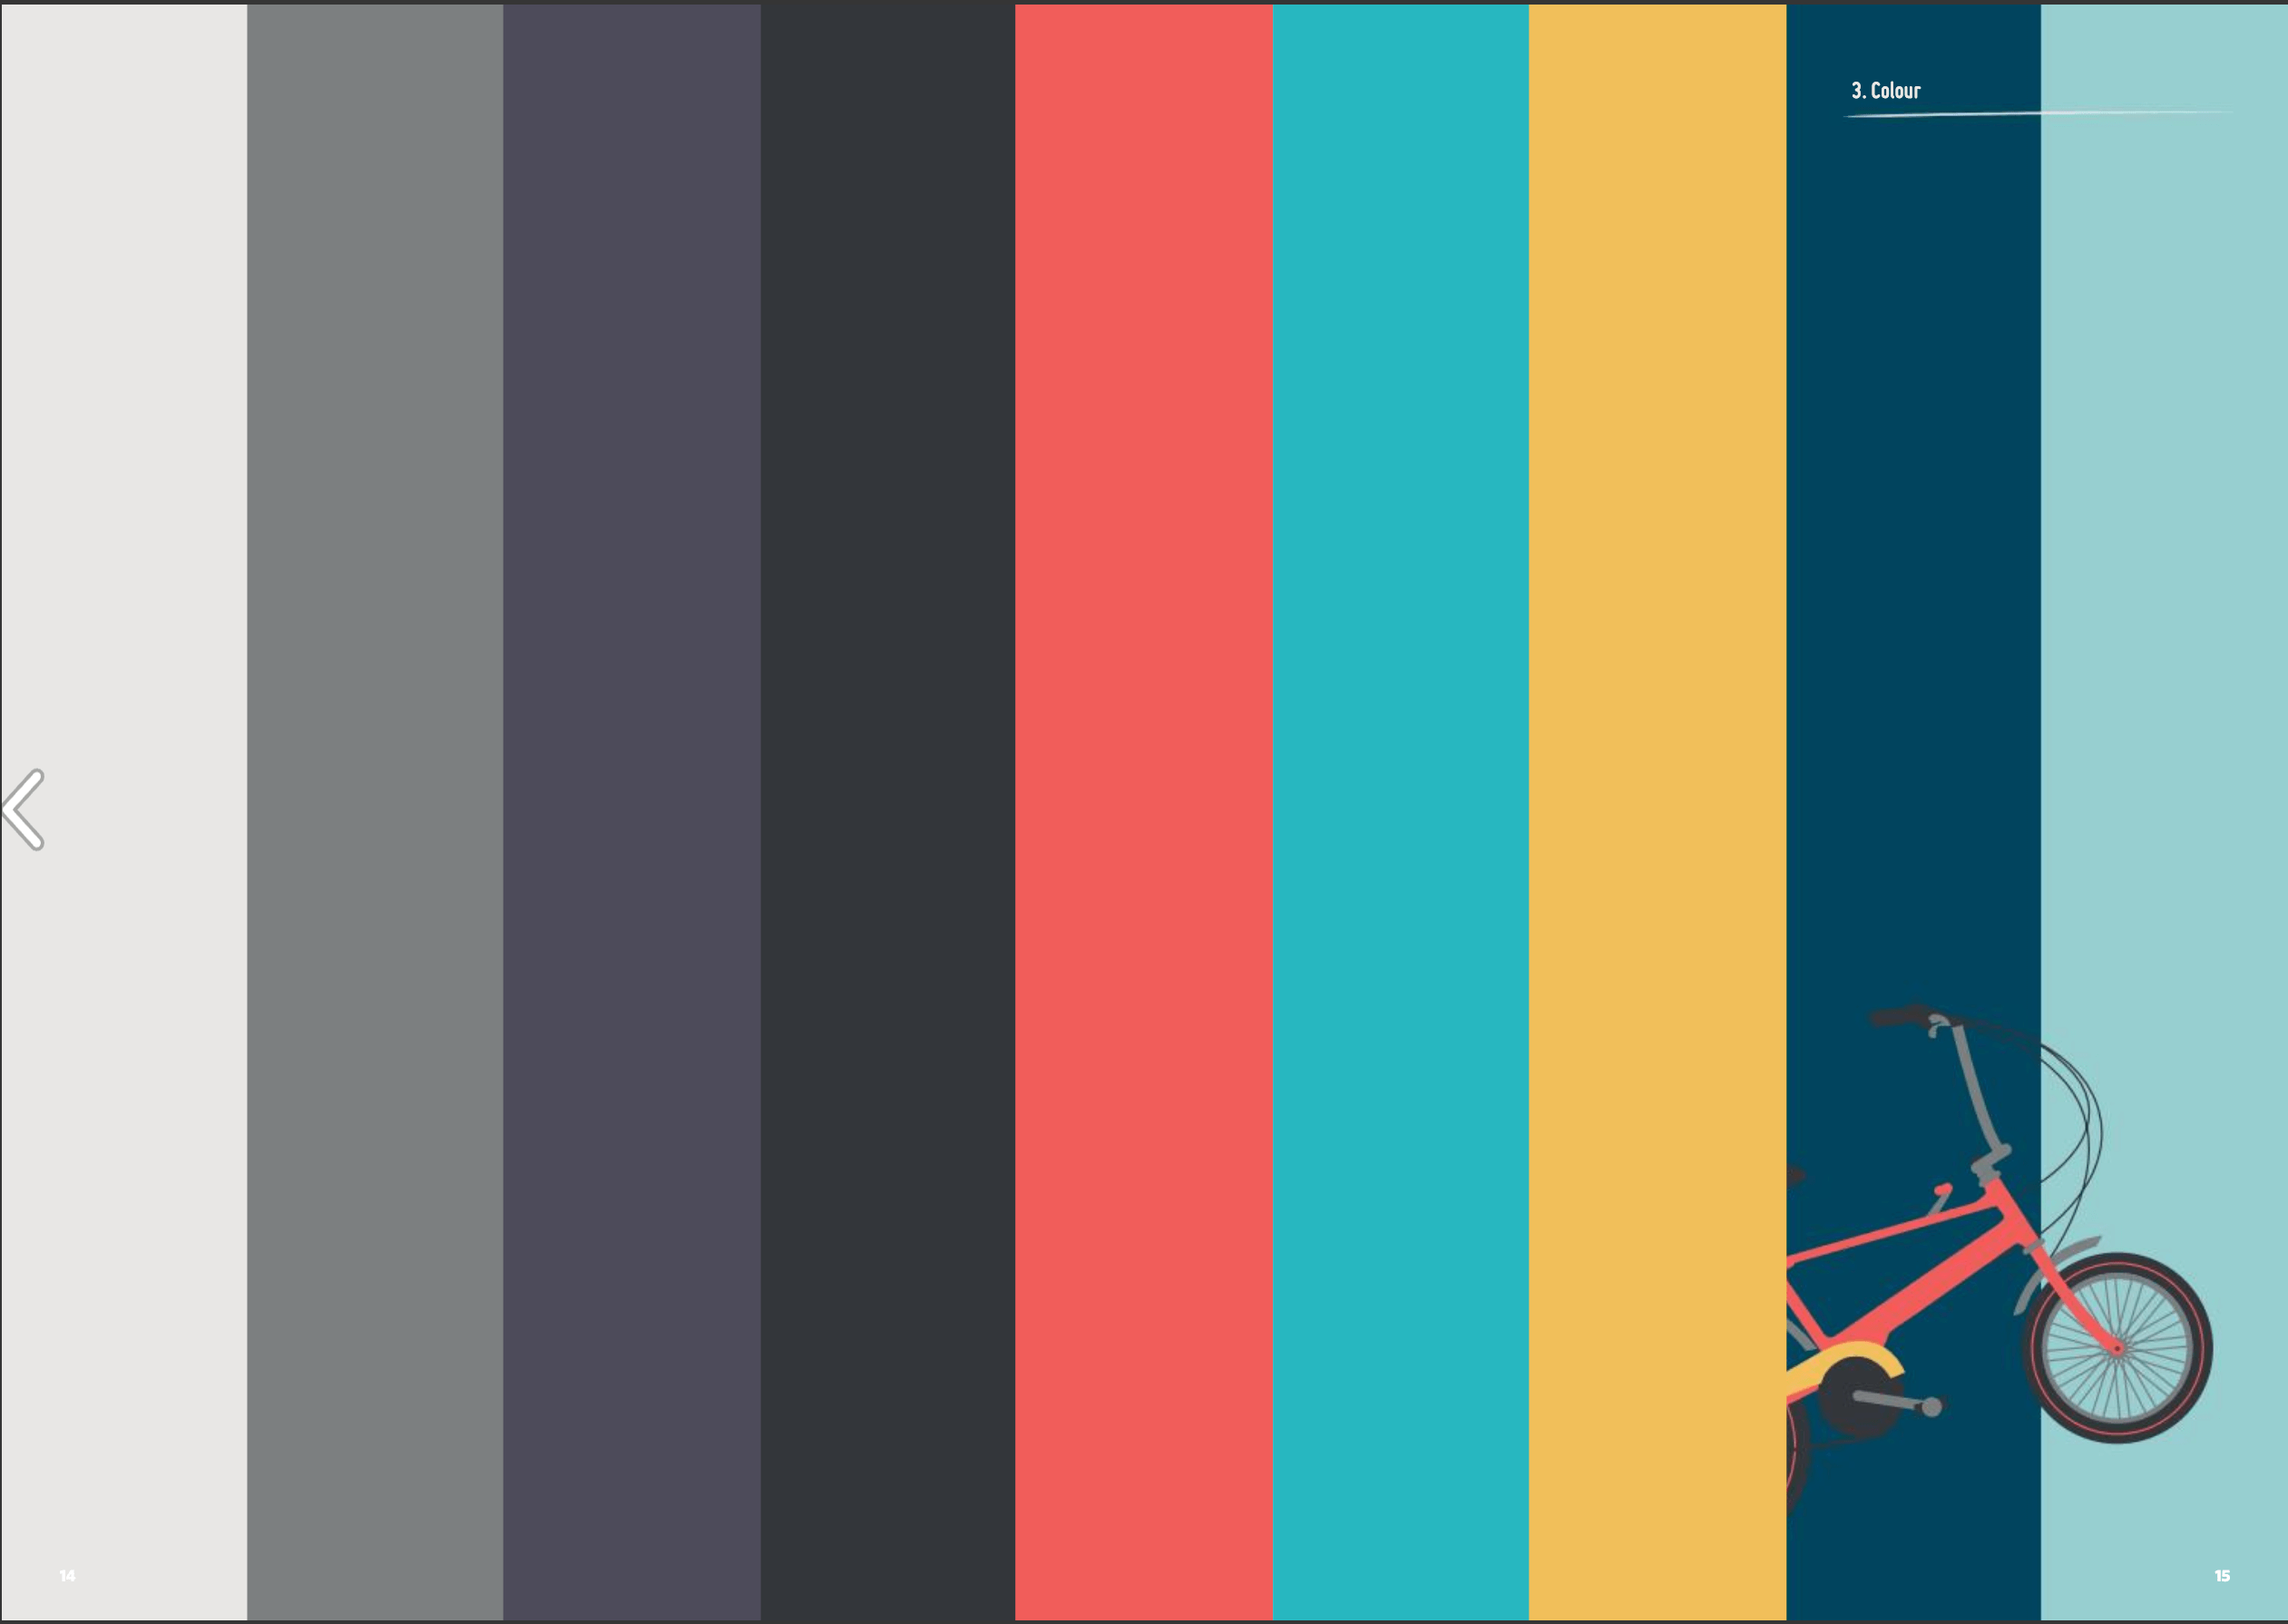 Love to Ride cycling community's color palette, featuring an illustration of a bike